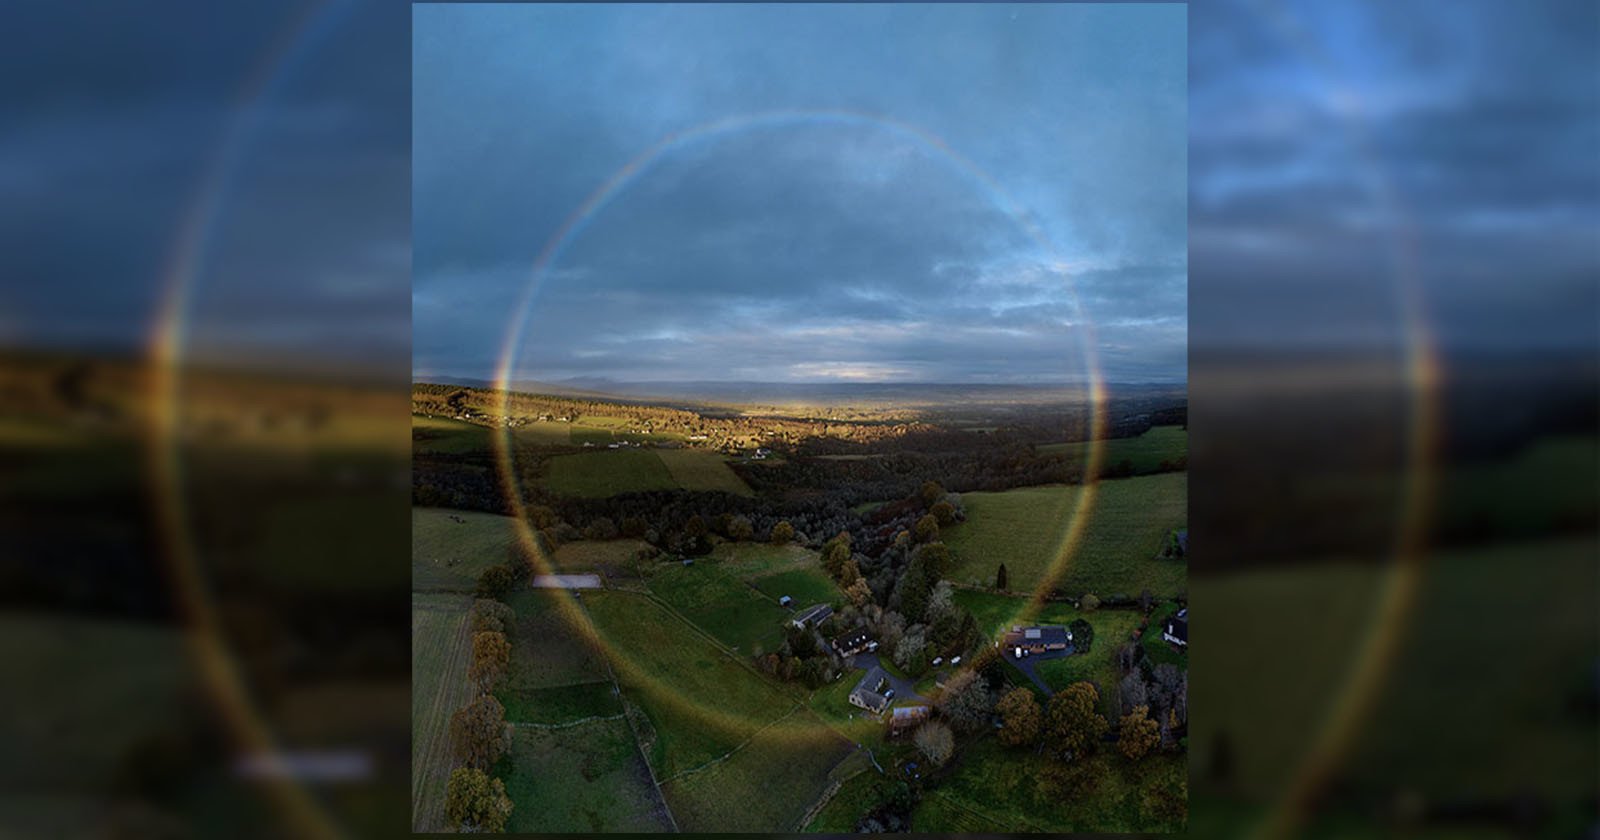 Photographer Uses Drone to Capture Ultra-Rare Full Circle Rainbow